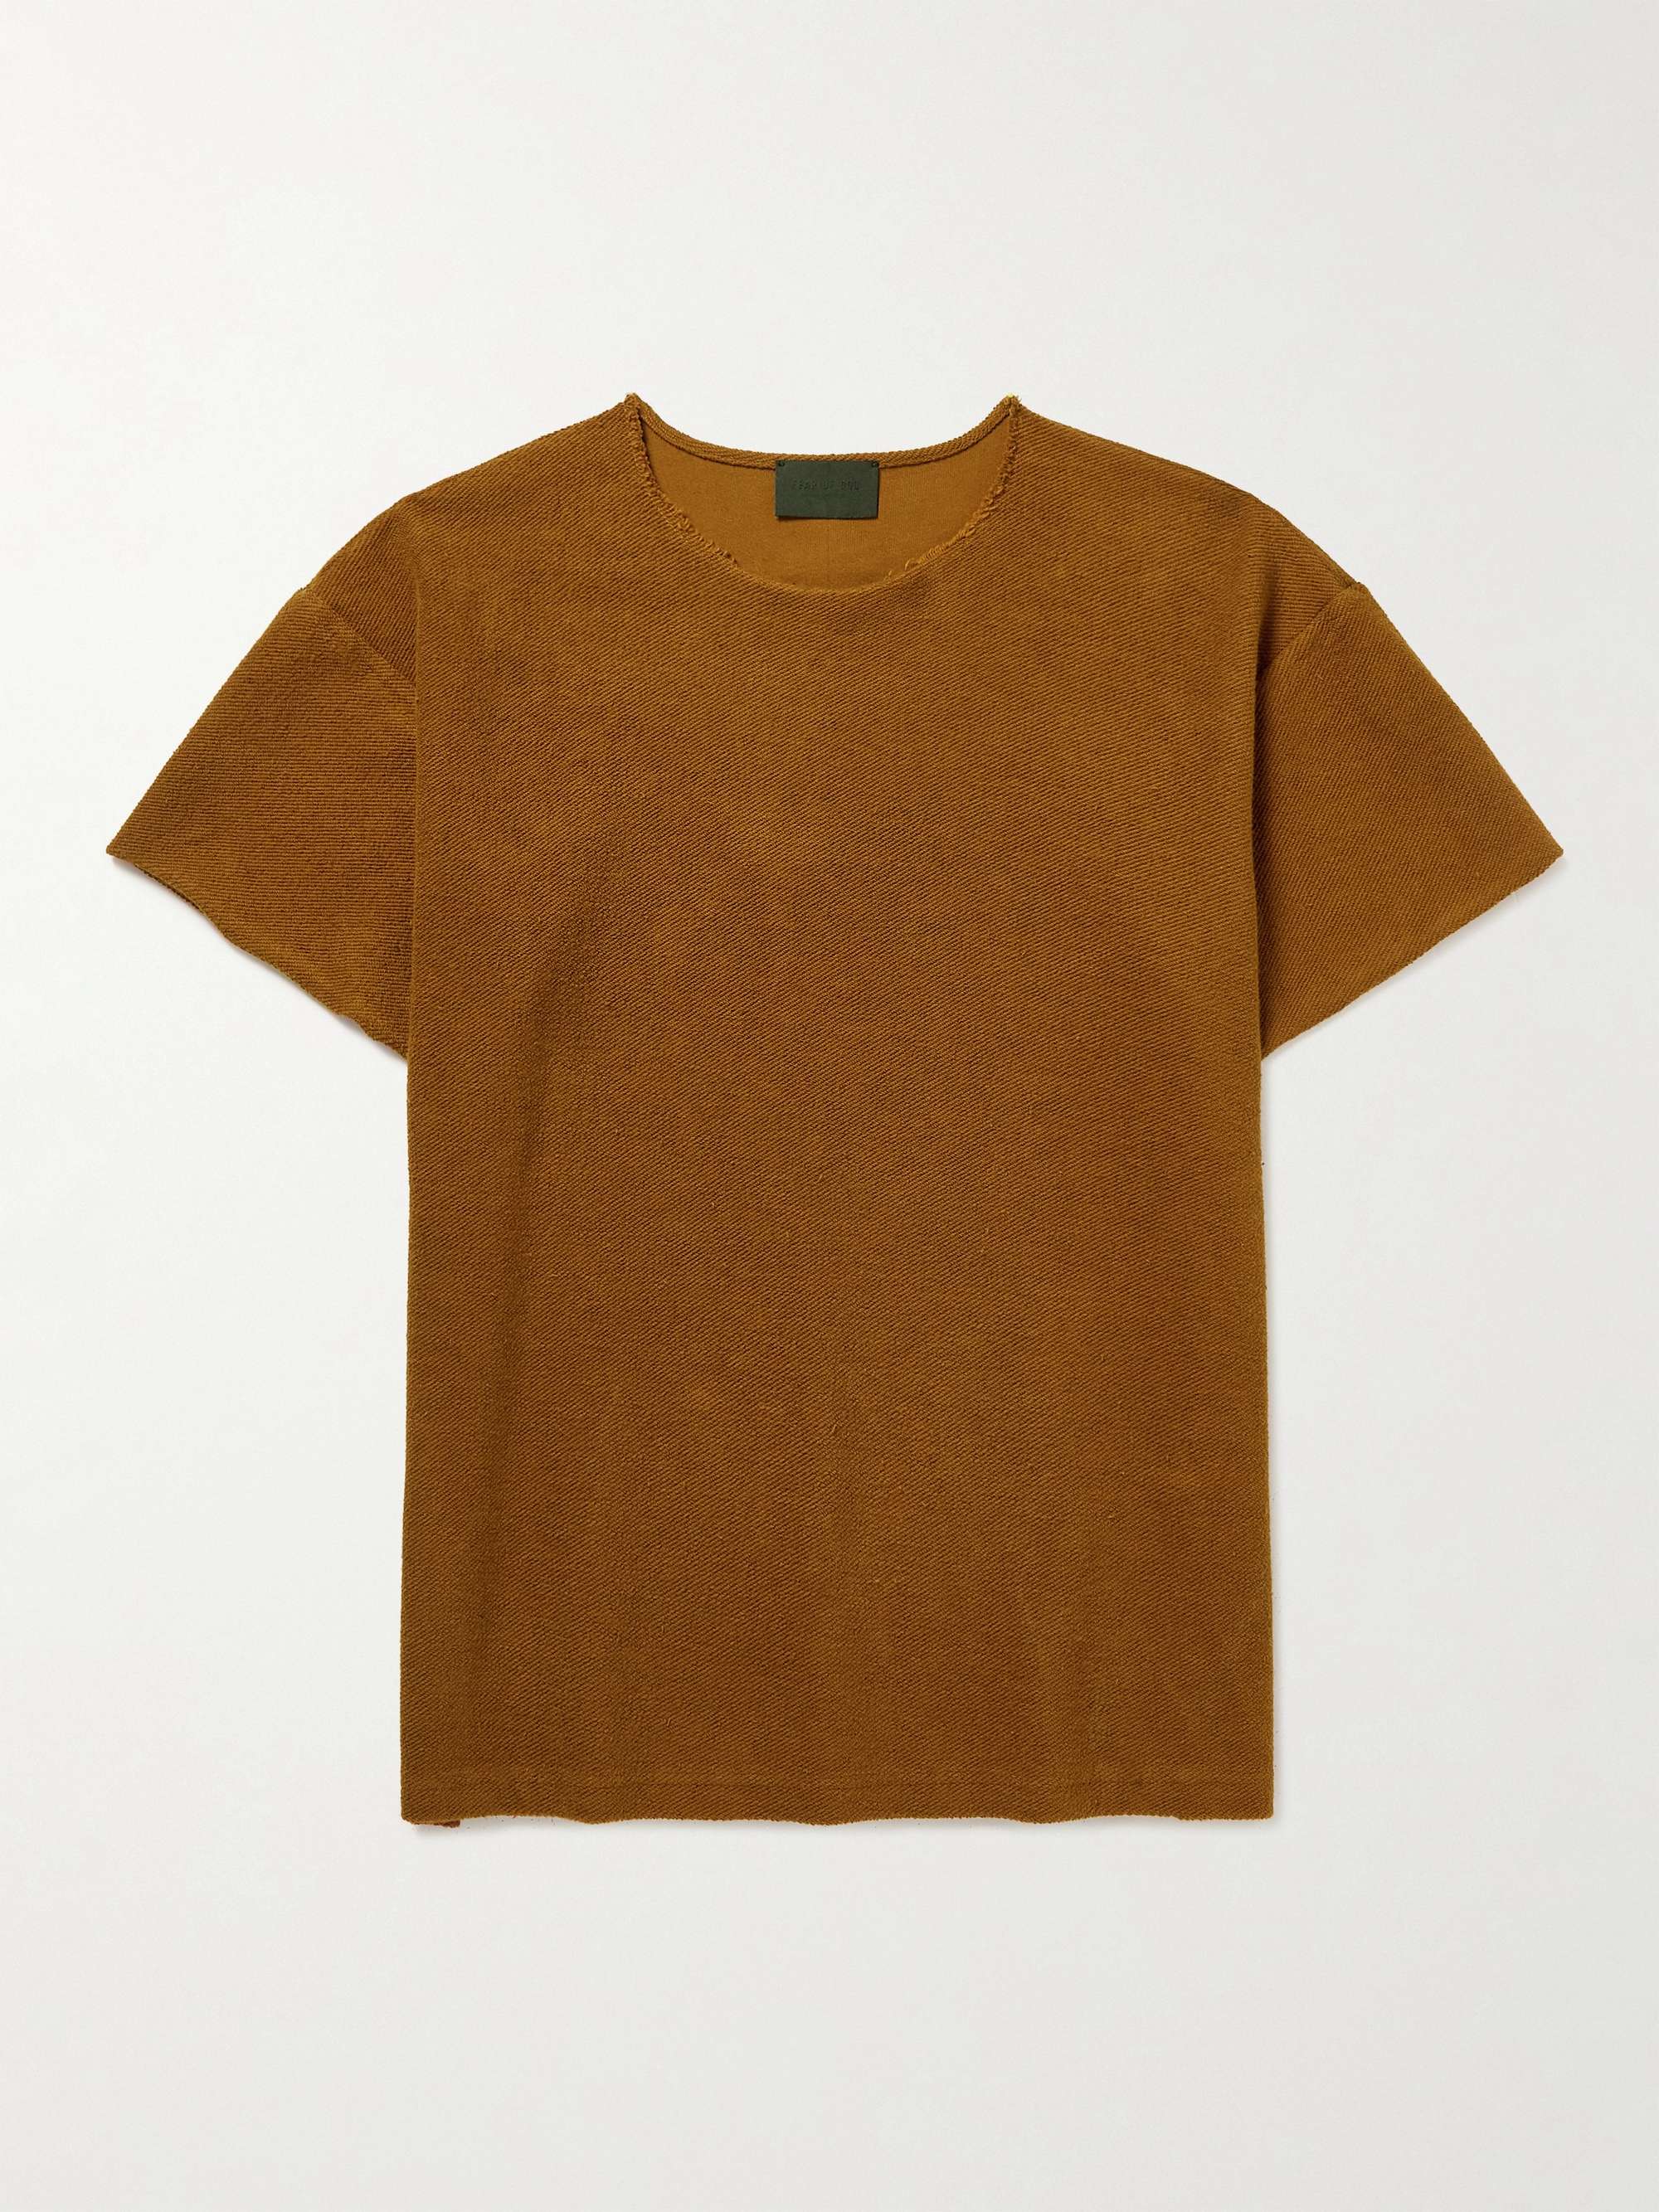 FEAR OF GOD Oversized Distressed Cotton-Terry T-Shirt